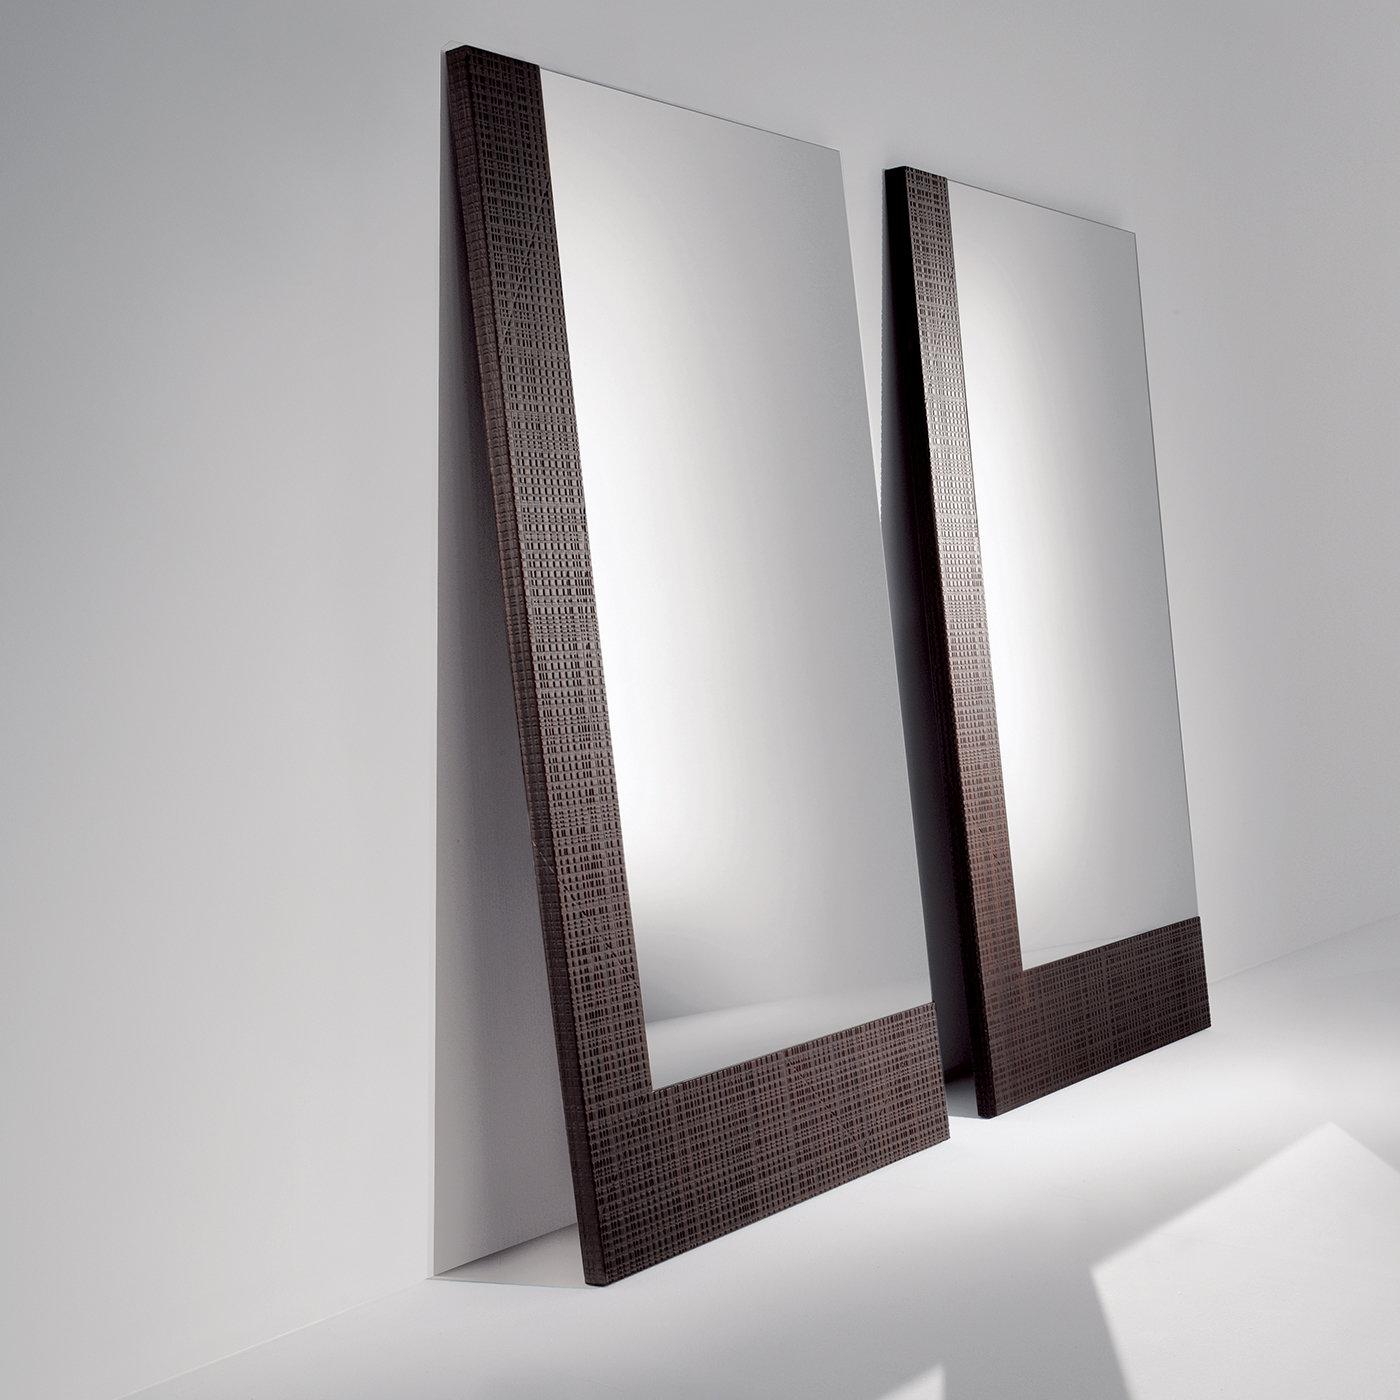 A splendid furnishing accessory, the BD 02 Maxima Mirror features a wooden frame with carved detail on the front panel. This version is in carved wenge and is also available in other wood tones and in a variety of sizes upon request. A marvellous